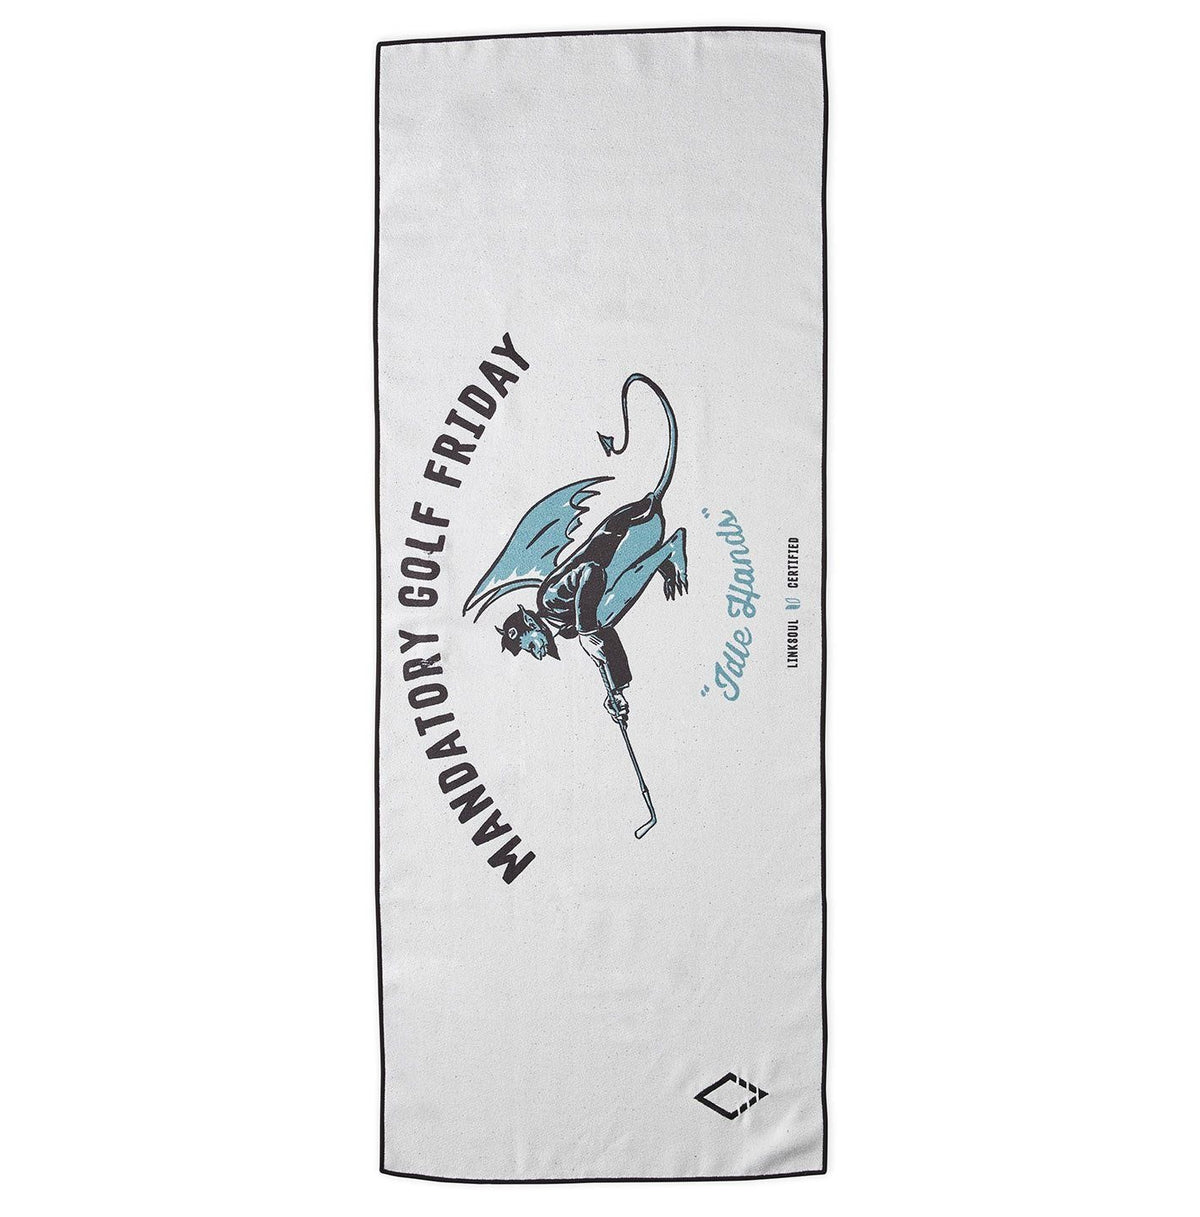 The Idle Golf Towel